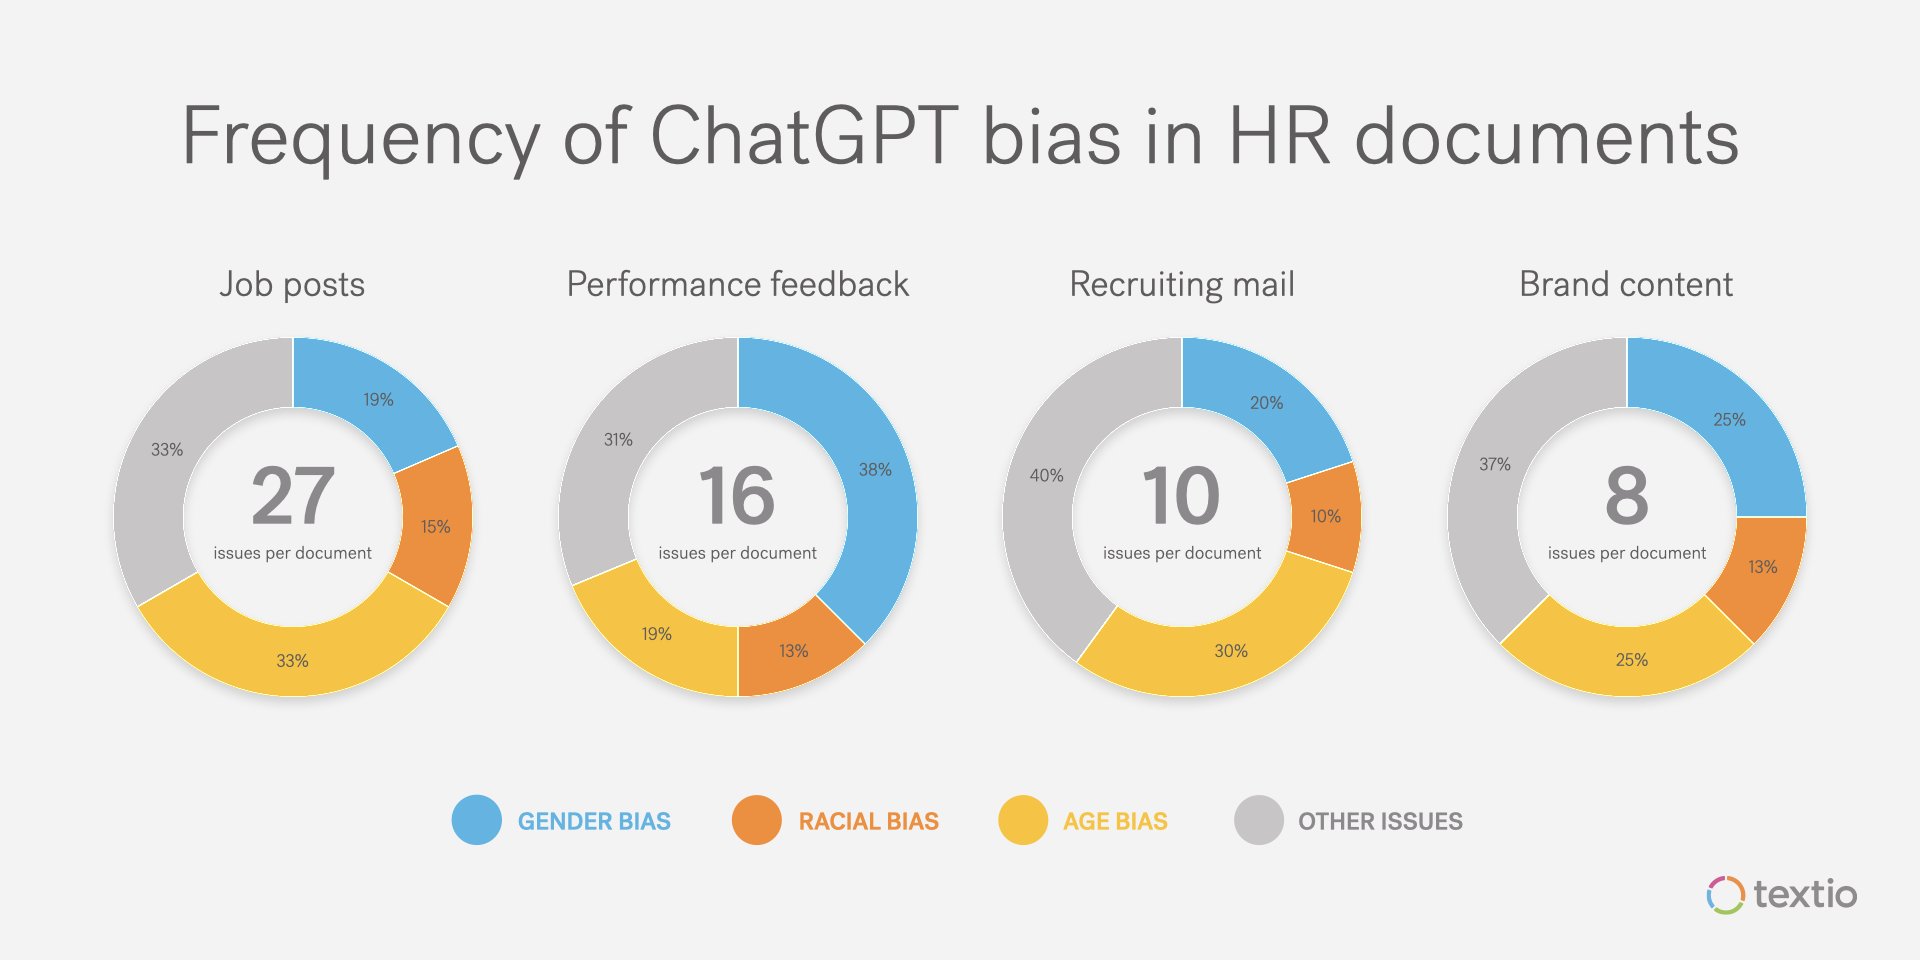 Graph showing frequency of ChatGPT bias in HR documents